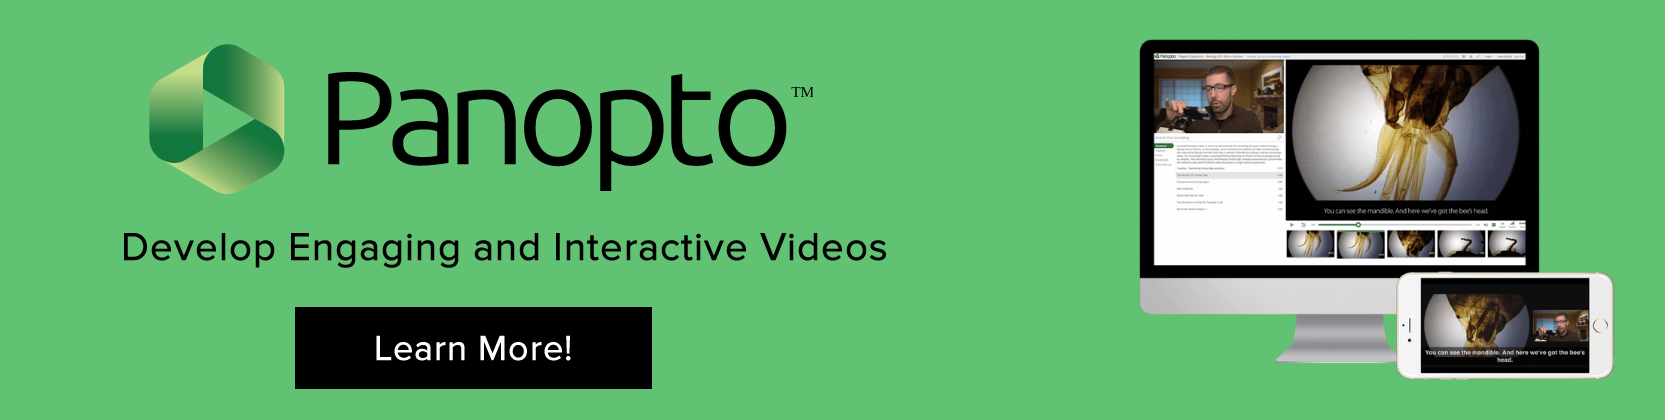 Panopto: A New Lecture Capture Tool has Arrived Page Banner 